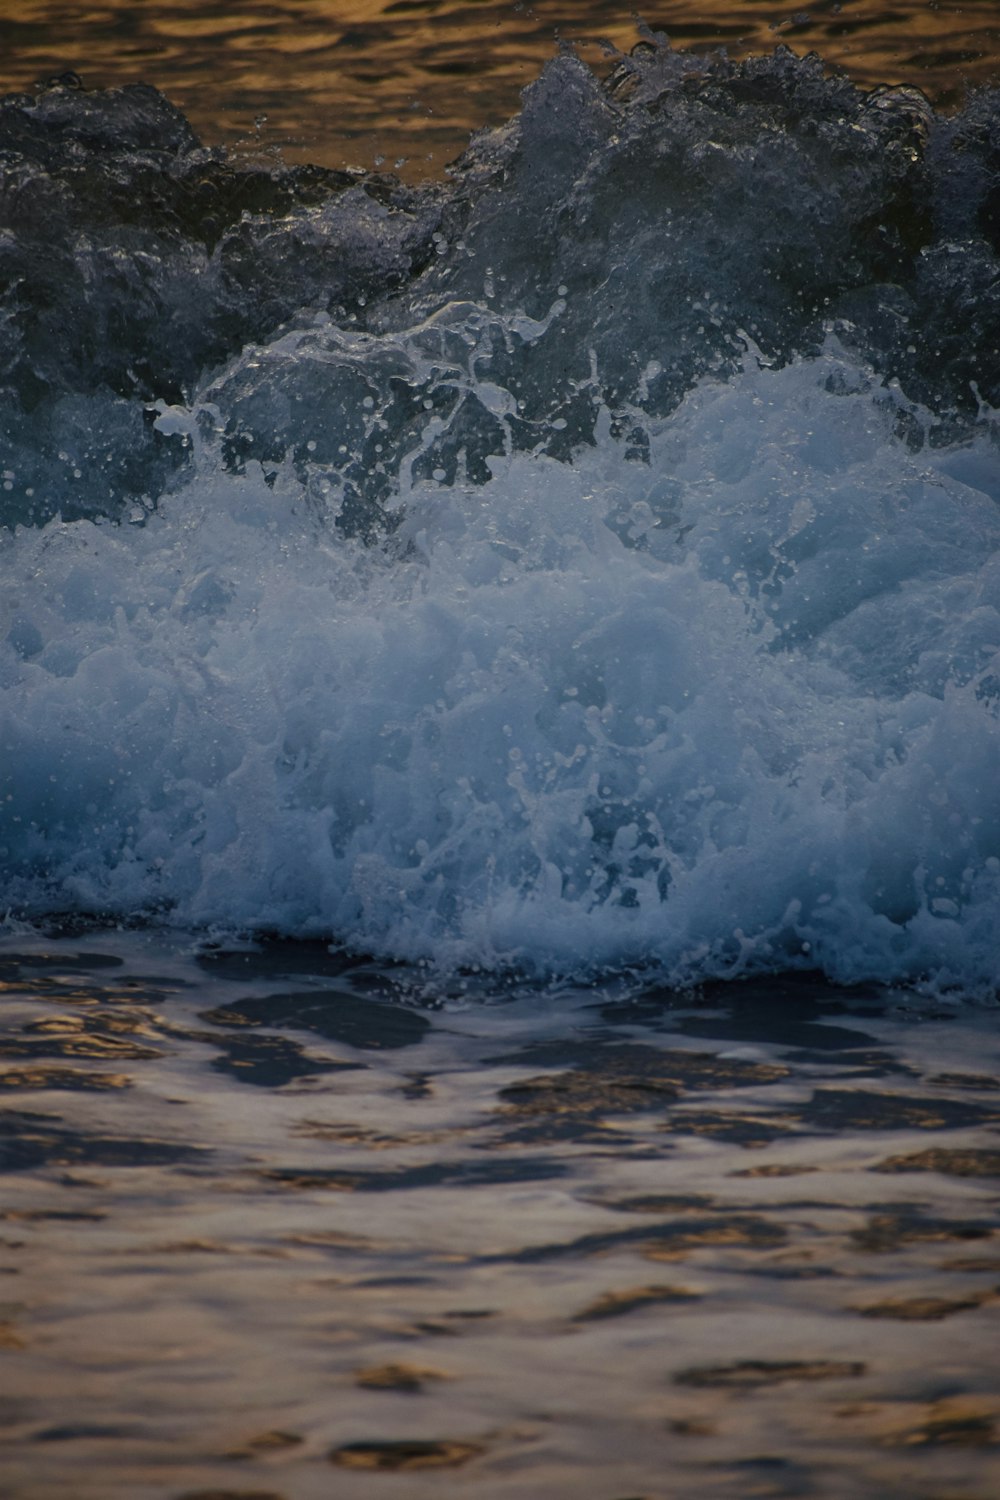 a close up of a wave on the water